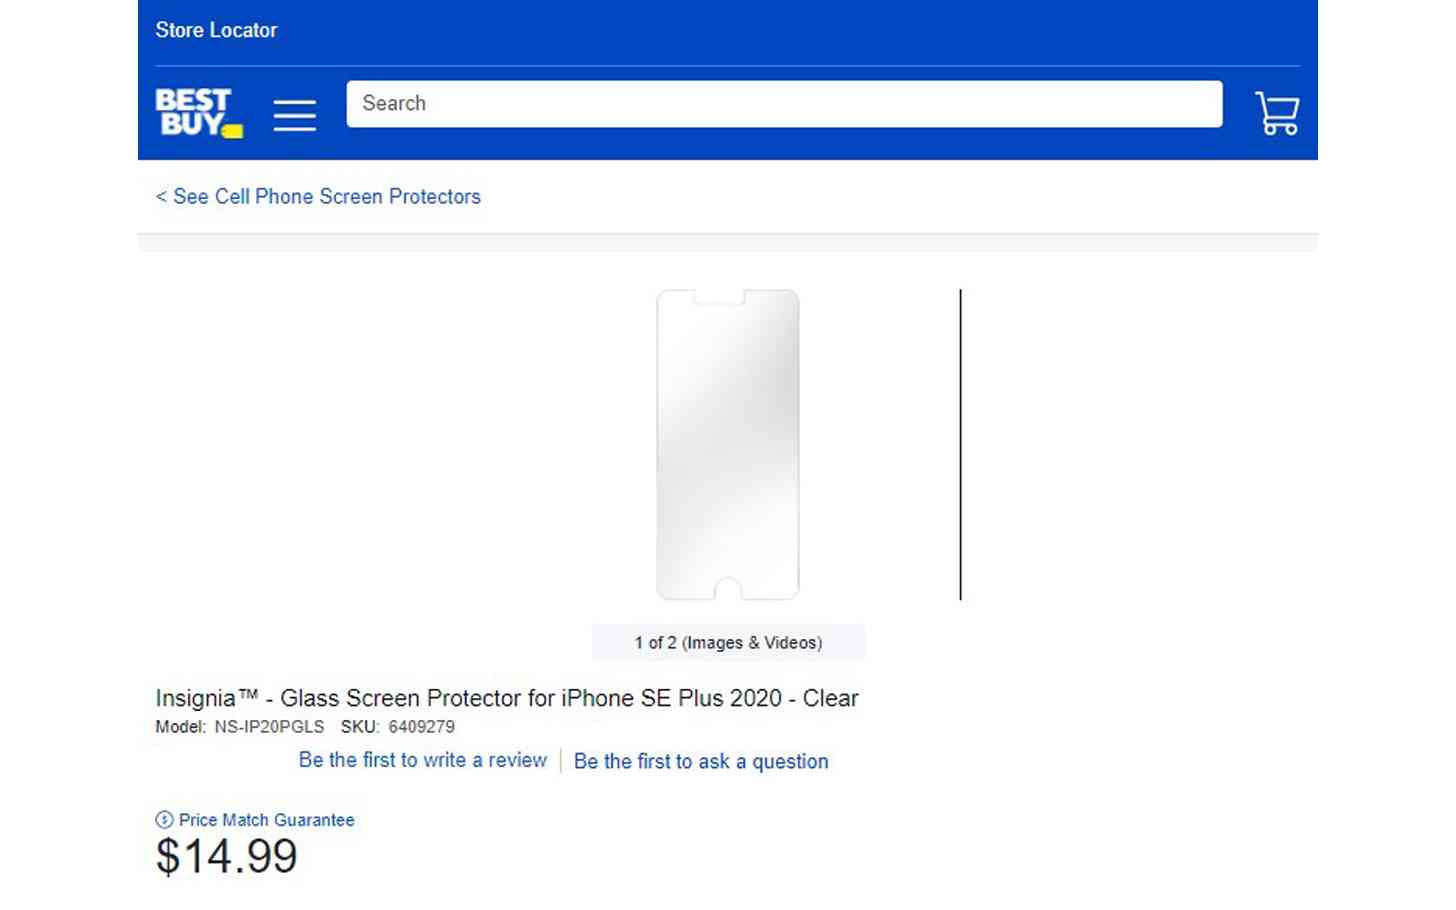 iPhone SE Plus 2020 Best Buy product page